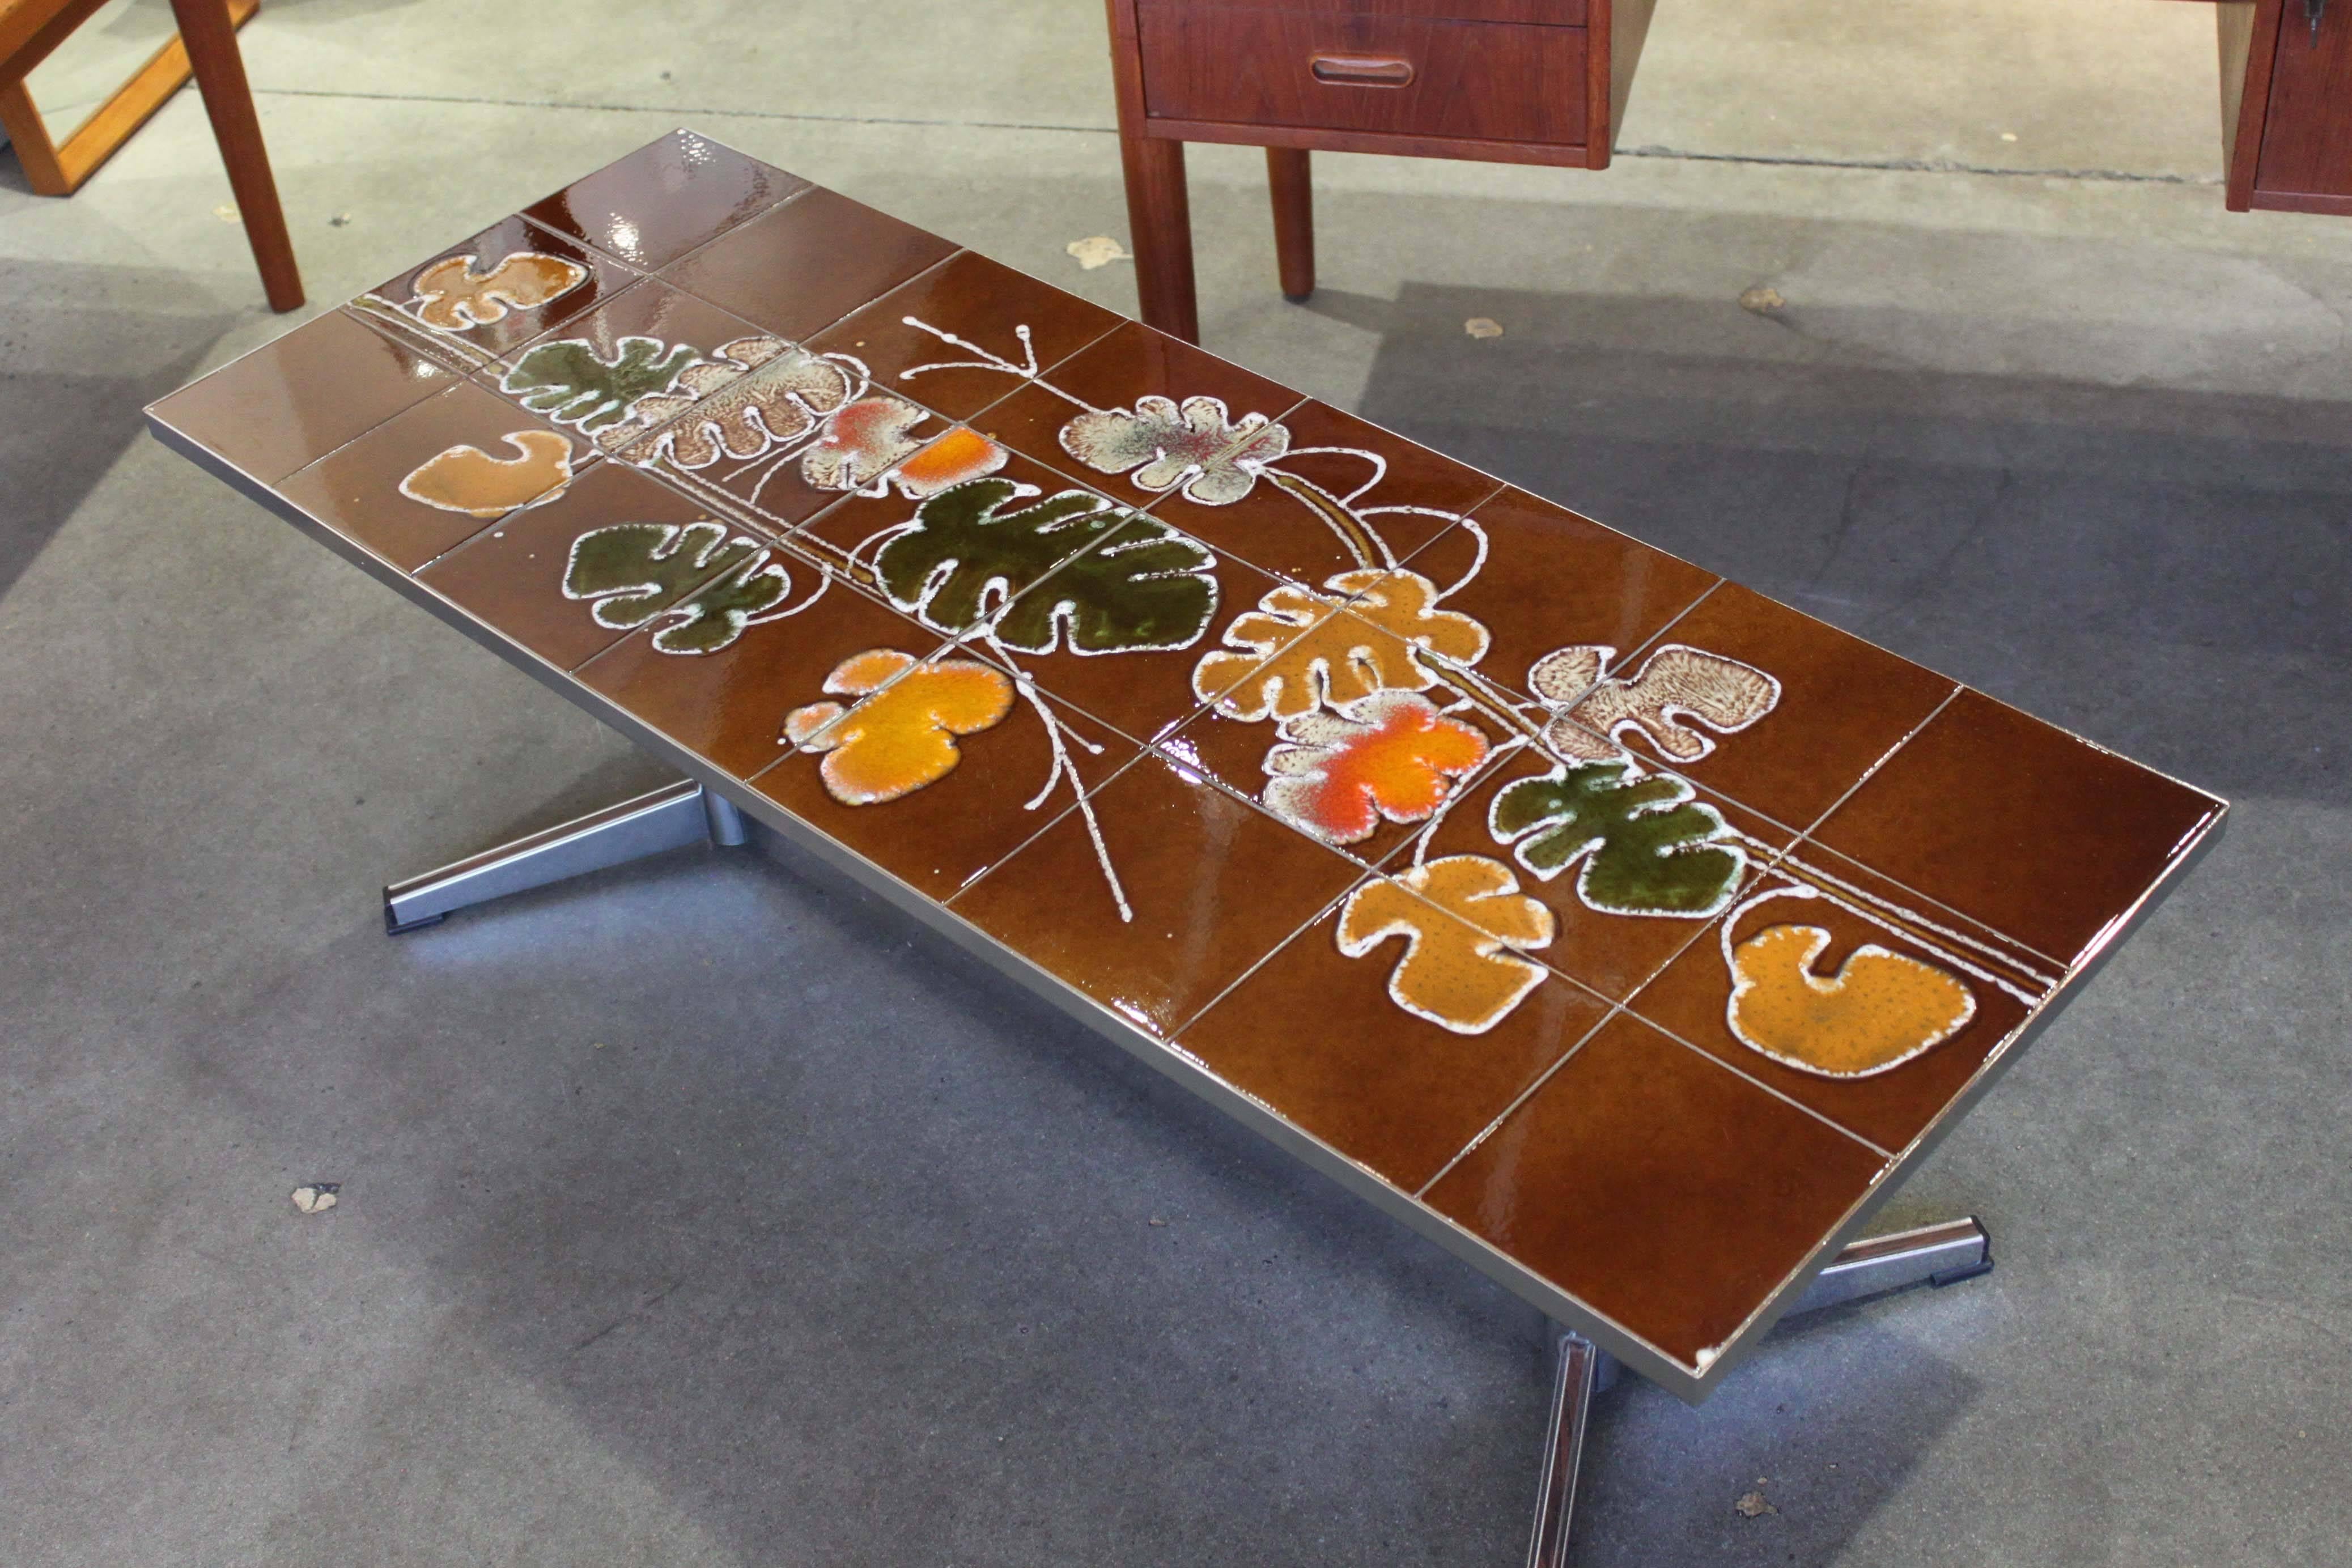 Tiled coffee table with floral motif attributed to Danish maker Adri. Chrome base has wood grain inserts, in very good original condition.